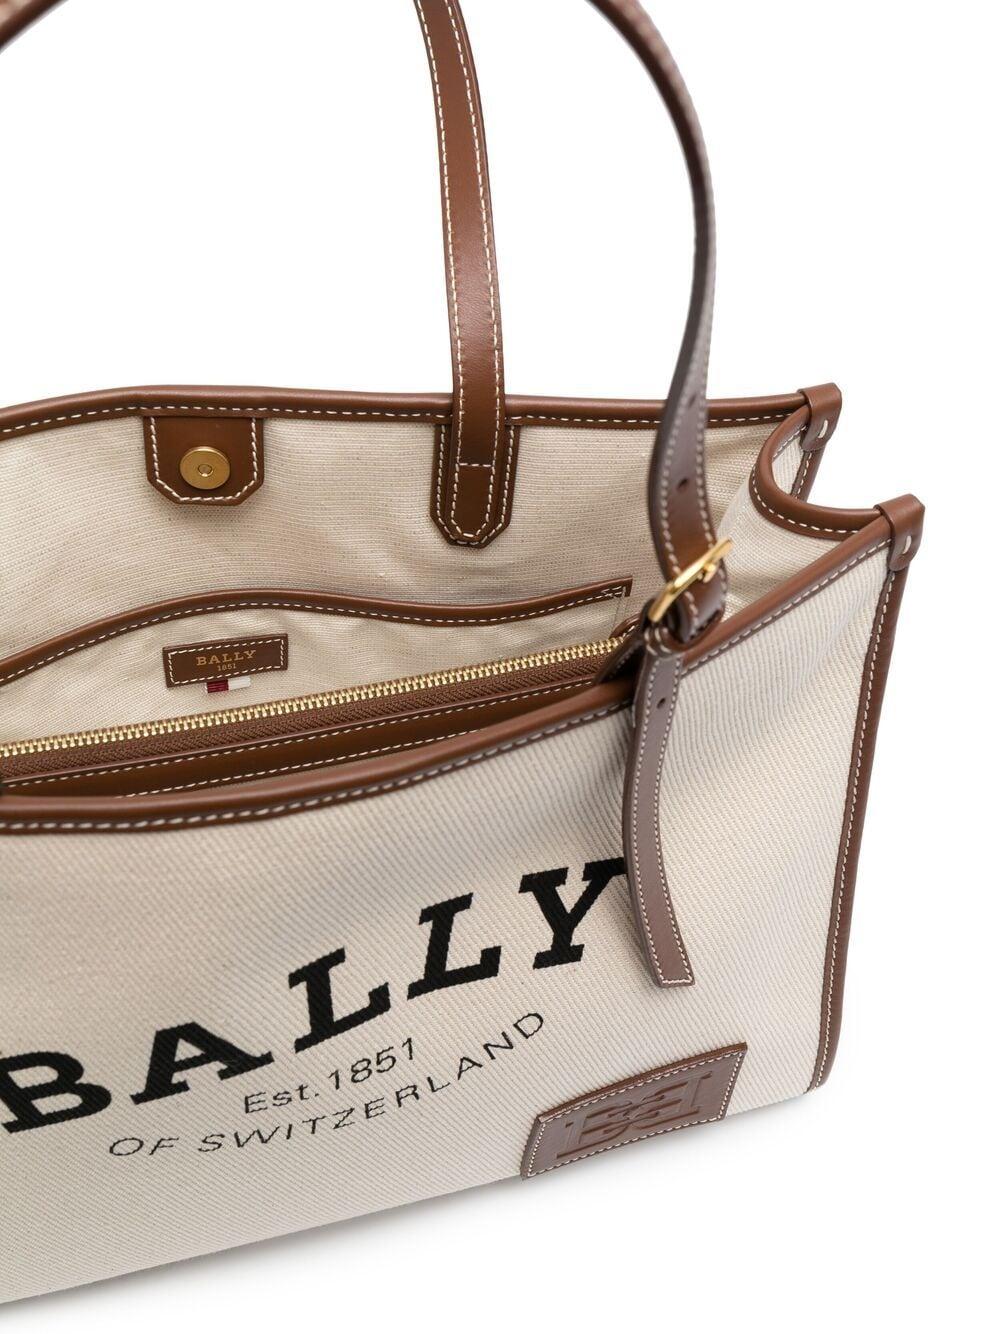 Bally Caliest Canvas Tote Bag in Natural | Lyst